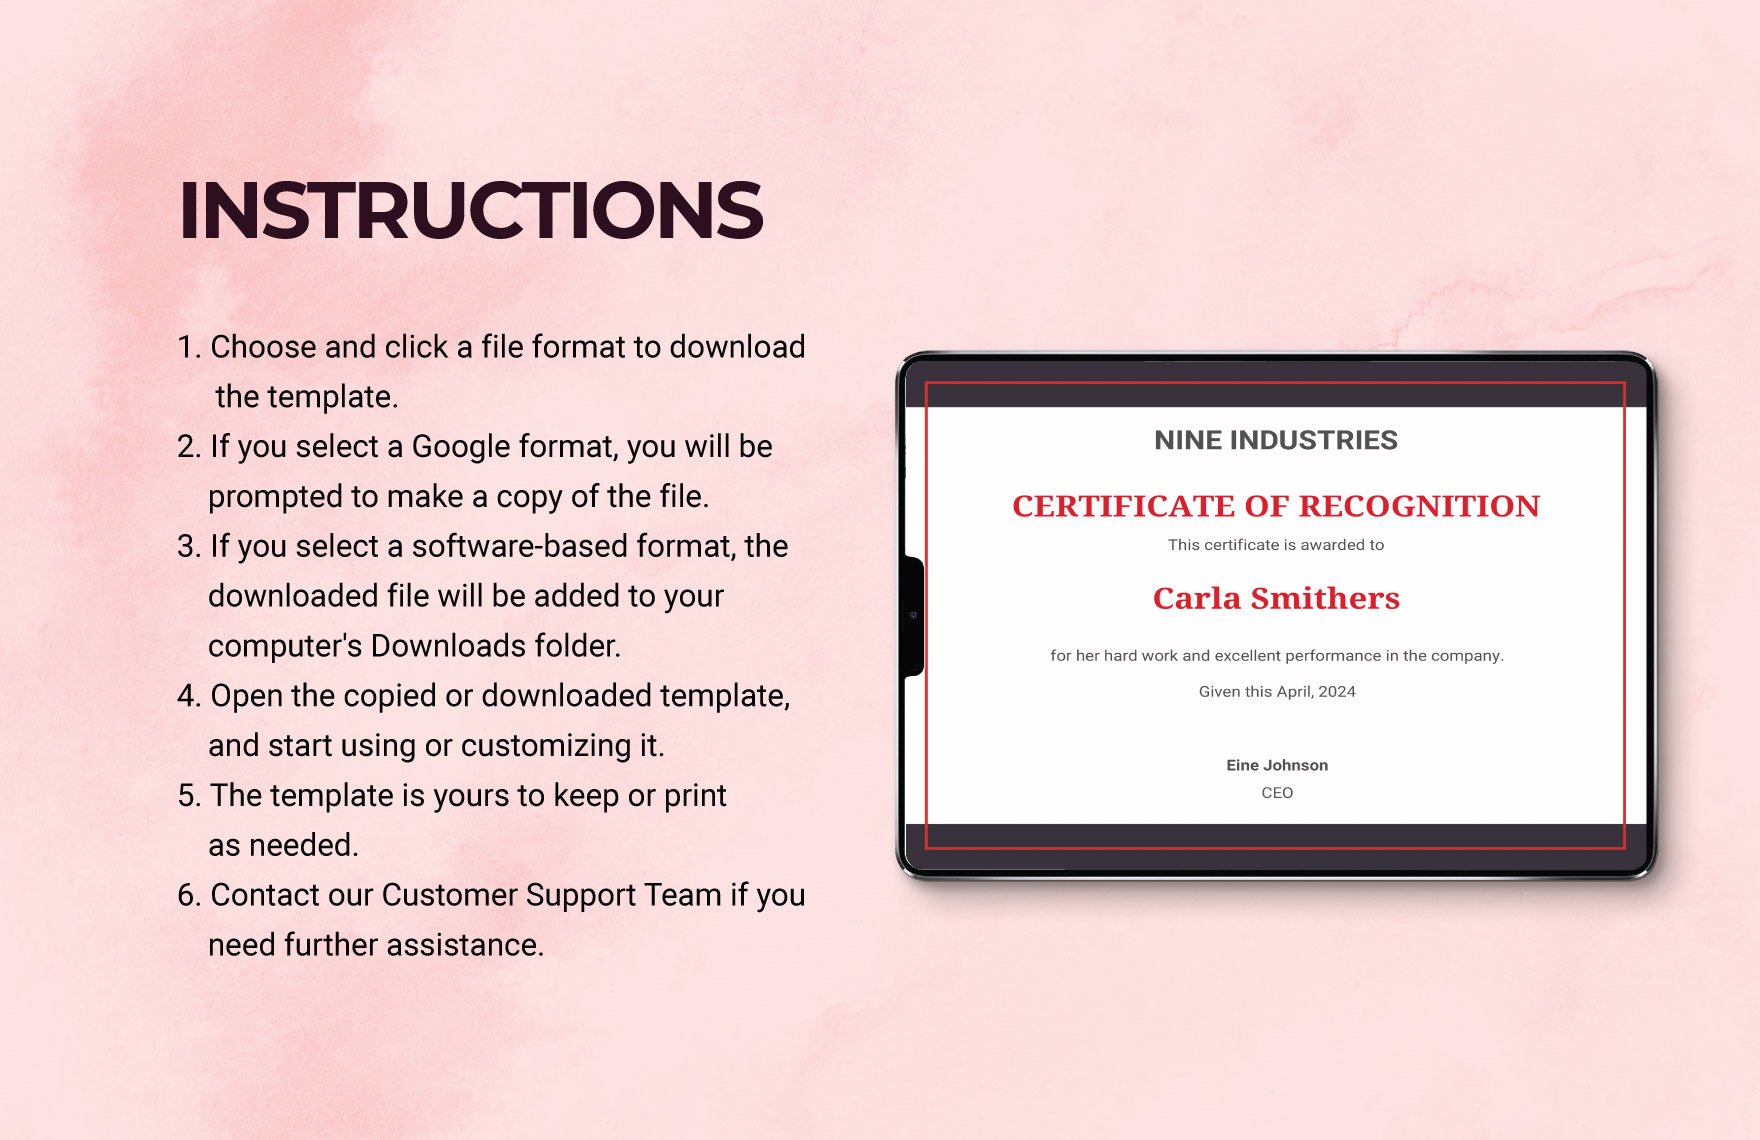 Sample Recognition Certificate Template